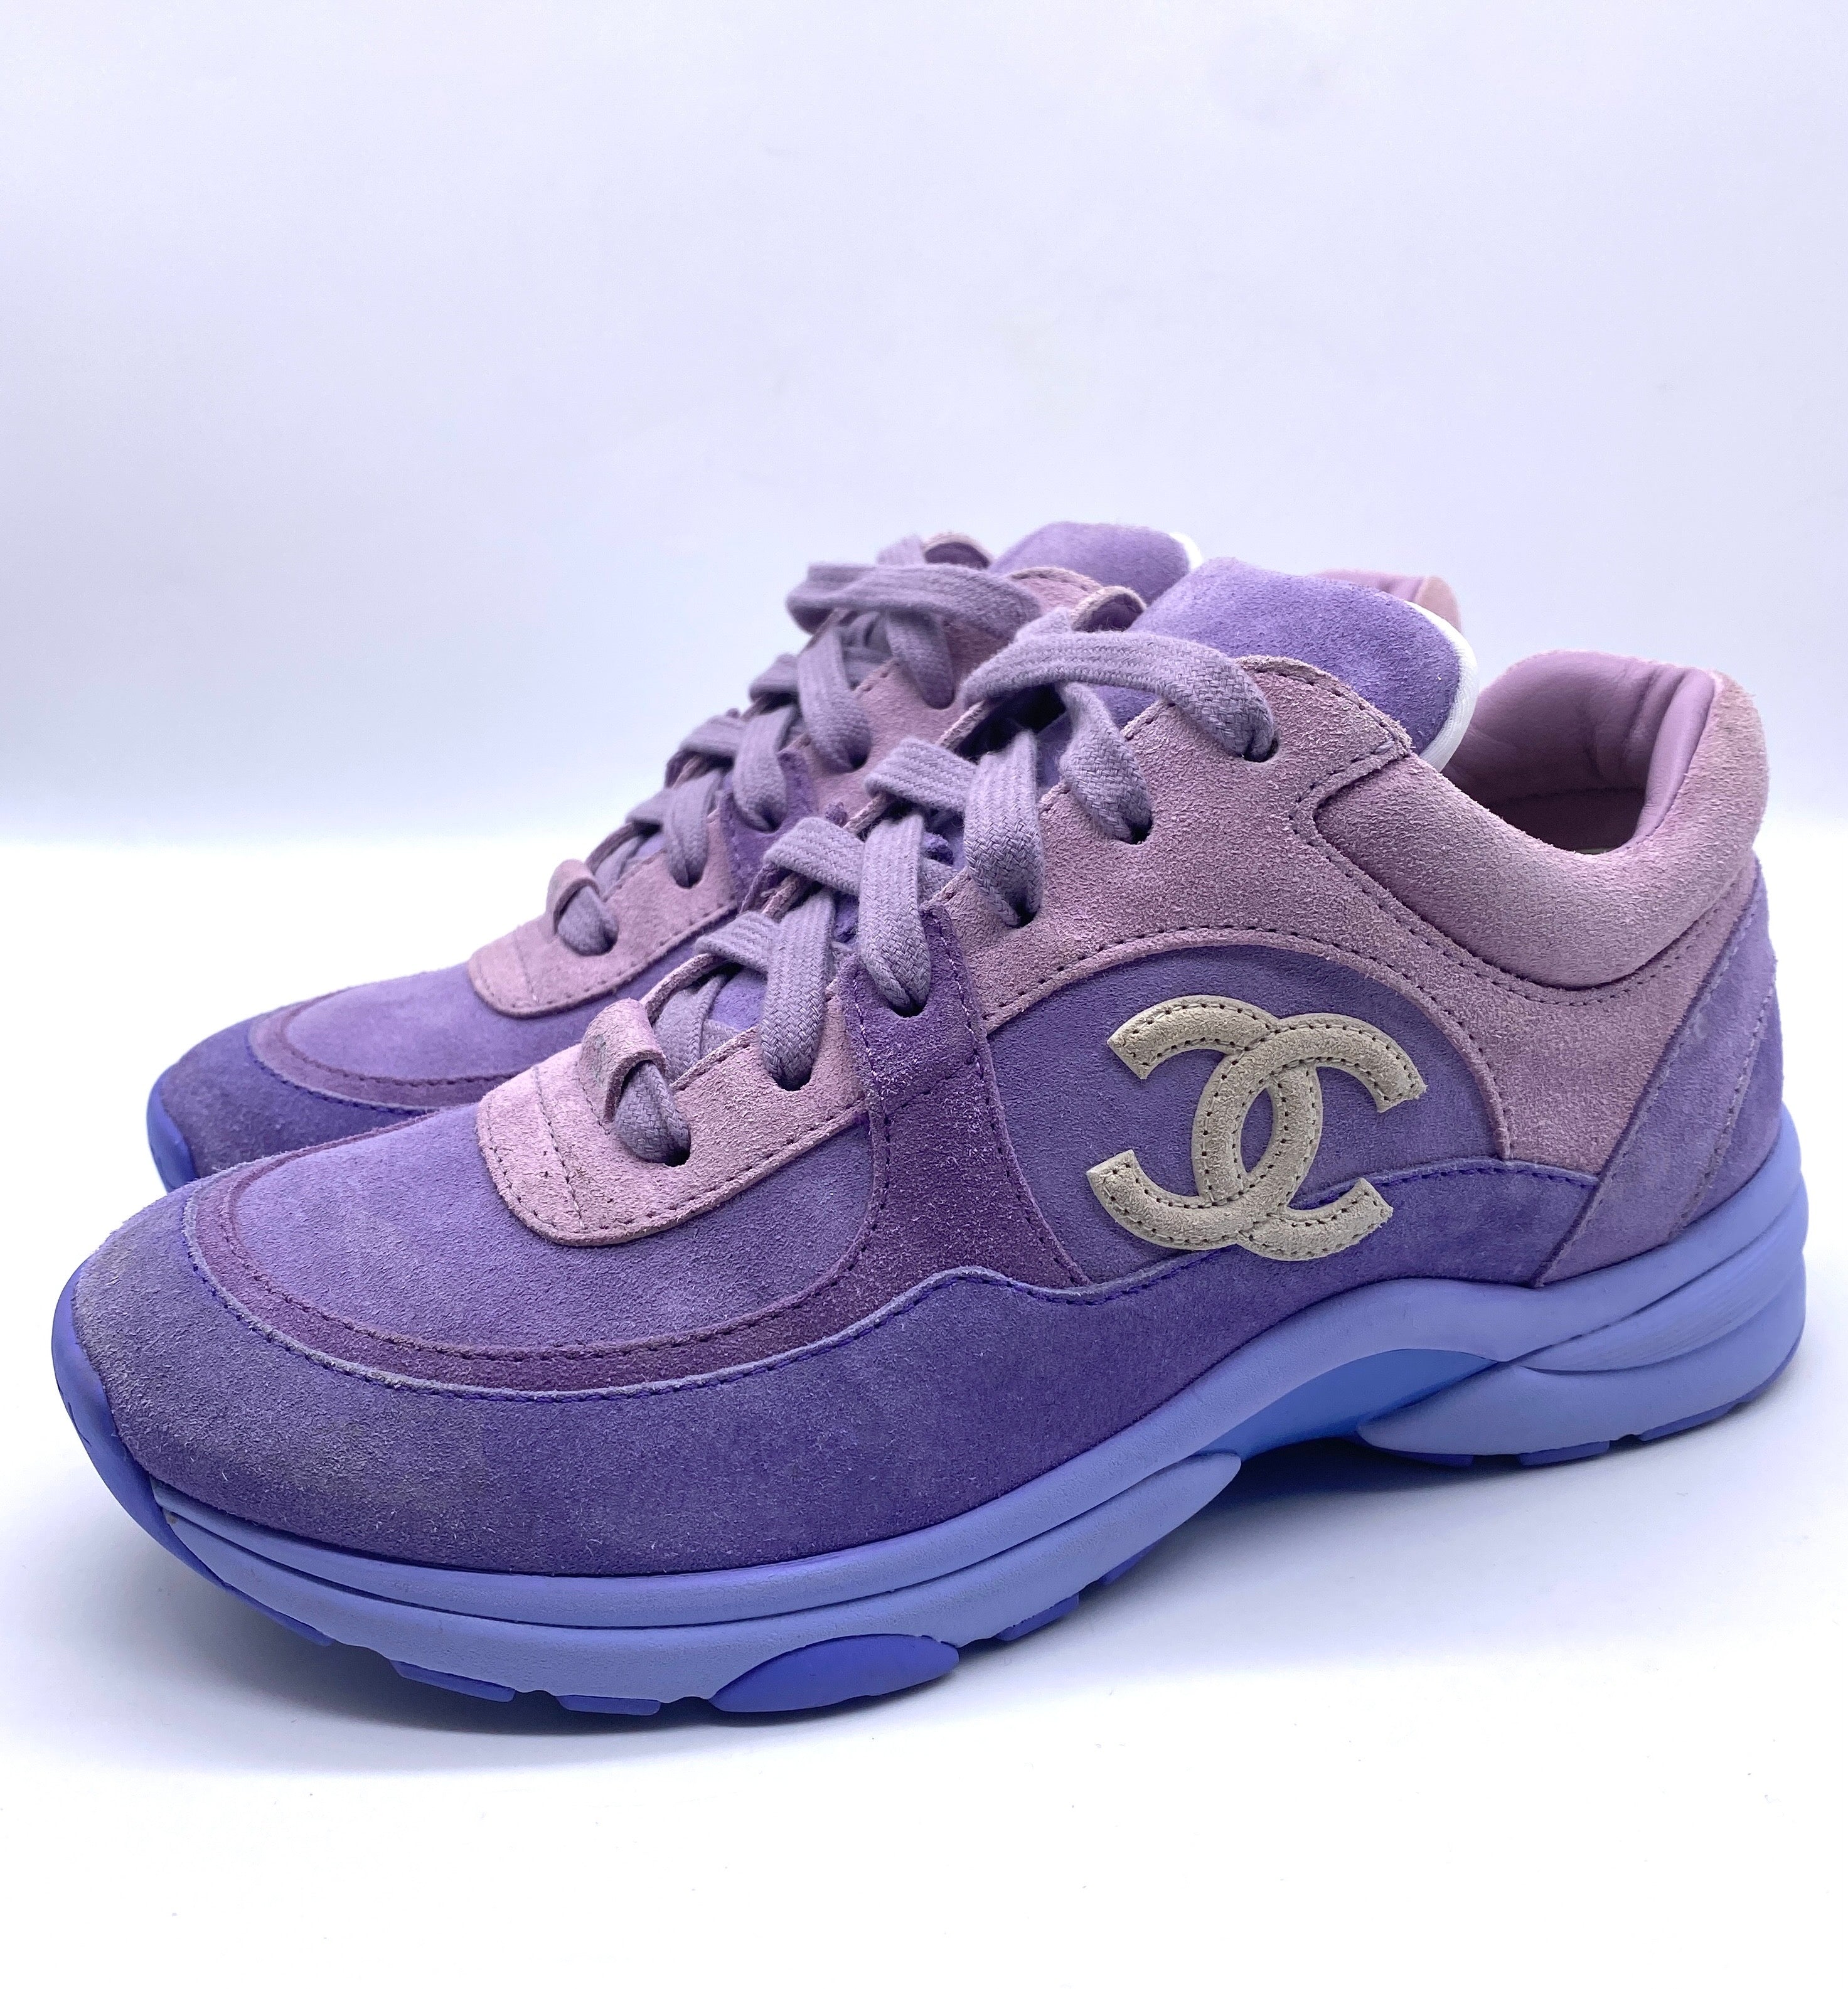 CHANEL Purple Low Top Interlocking CC Suede Sneakers  Size 36  Kouture  Consignment  New